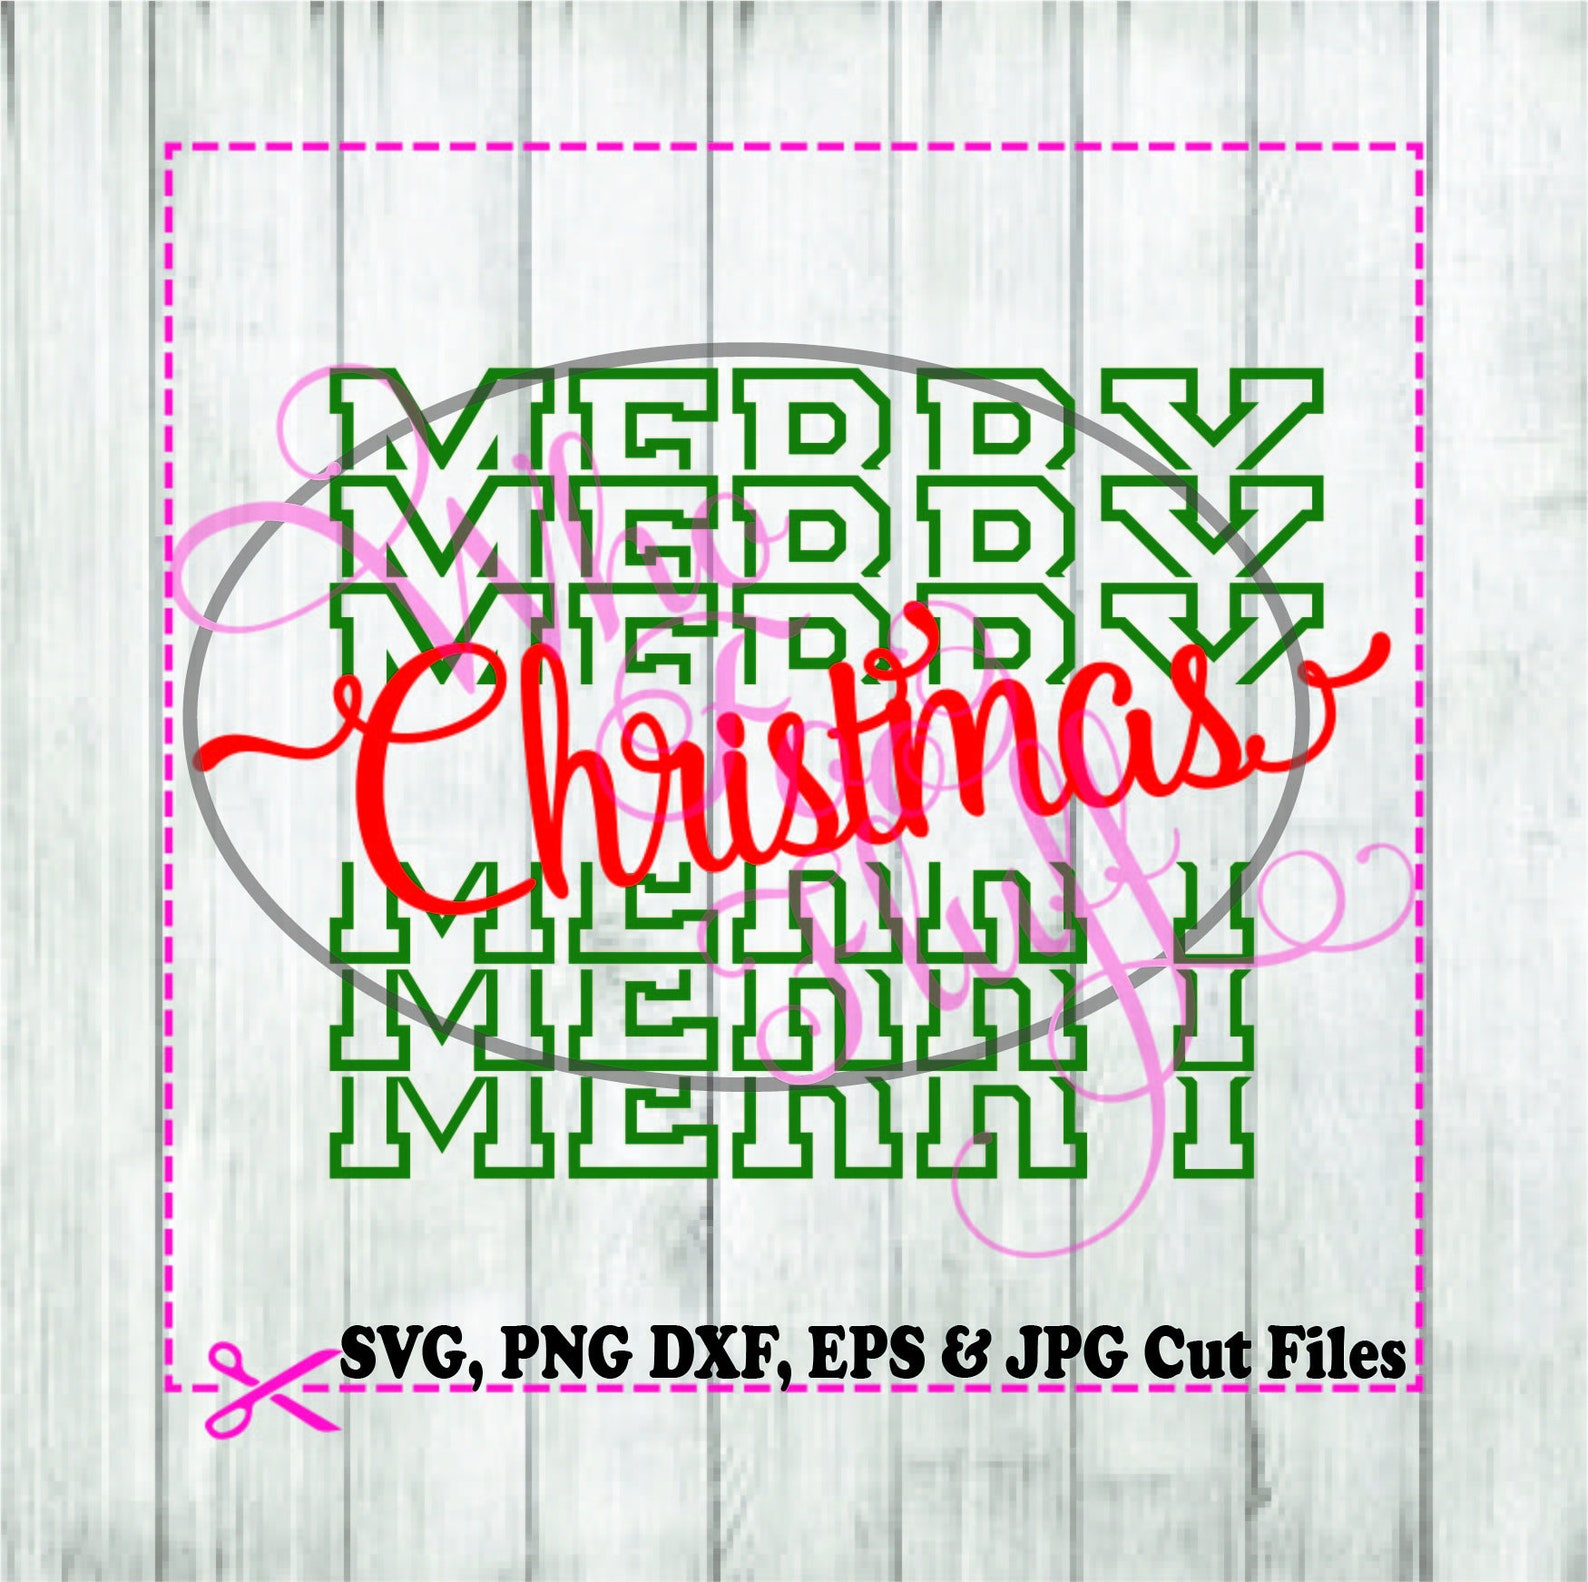 Merry Christmas Cut Out Letters Svg Png Jpg Dxf Eps Cutting | Etsy